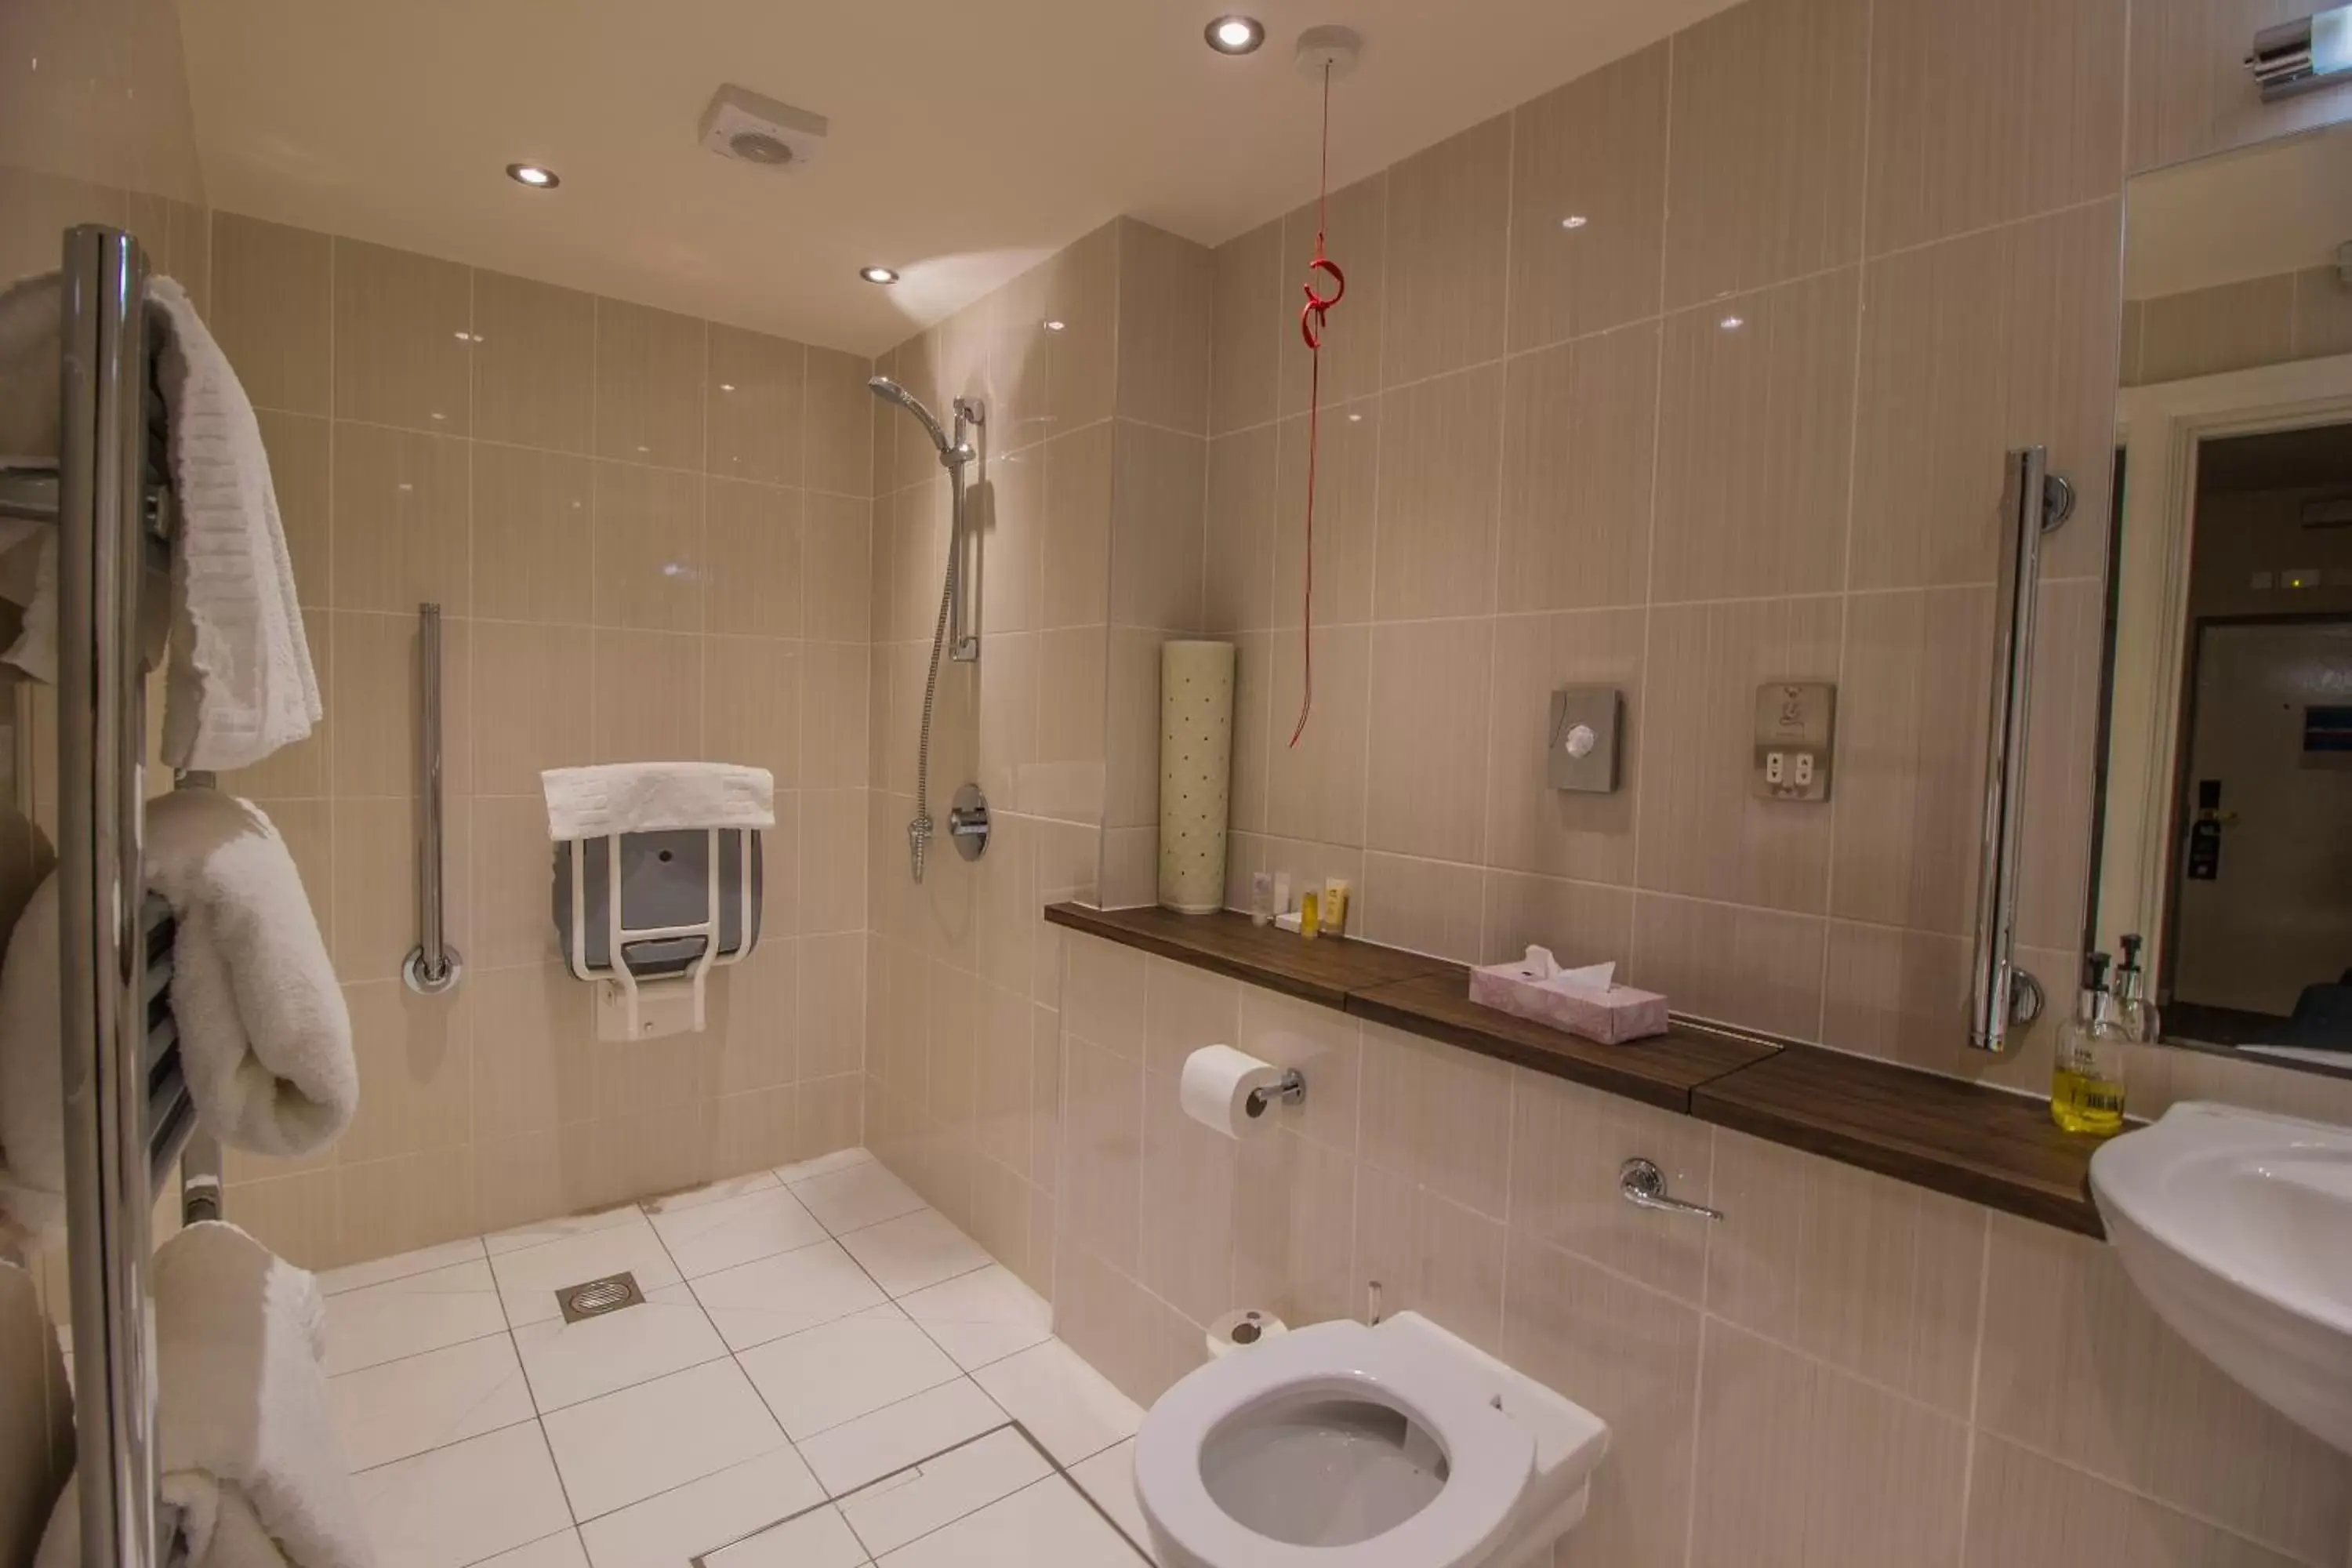 Bathroom in The Three Swans Hotel, Market Harborough, Leicestershire